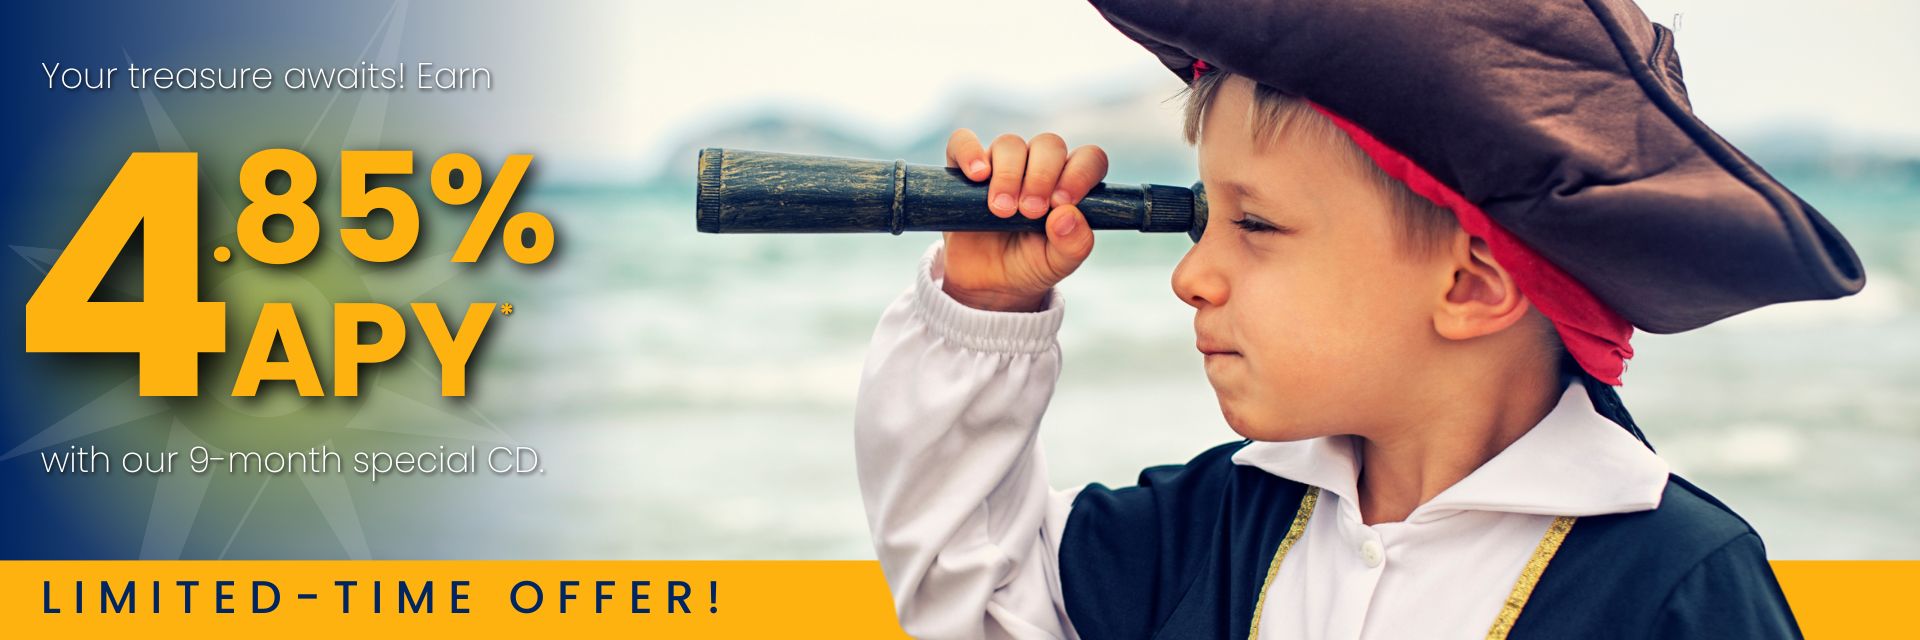 A young boy dressed as a pirate looks through a spyglass.